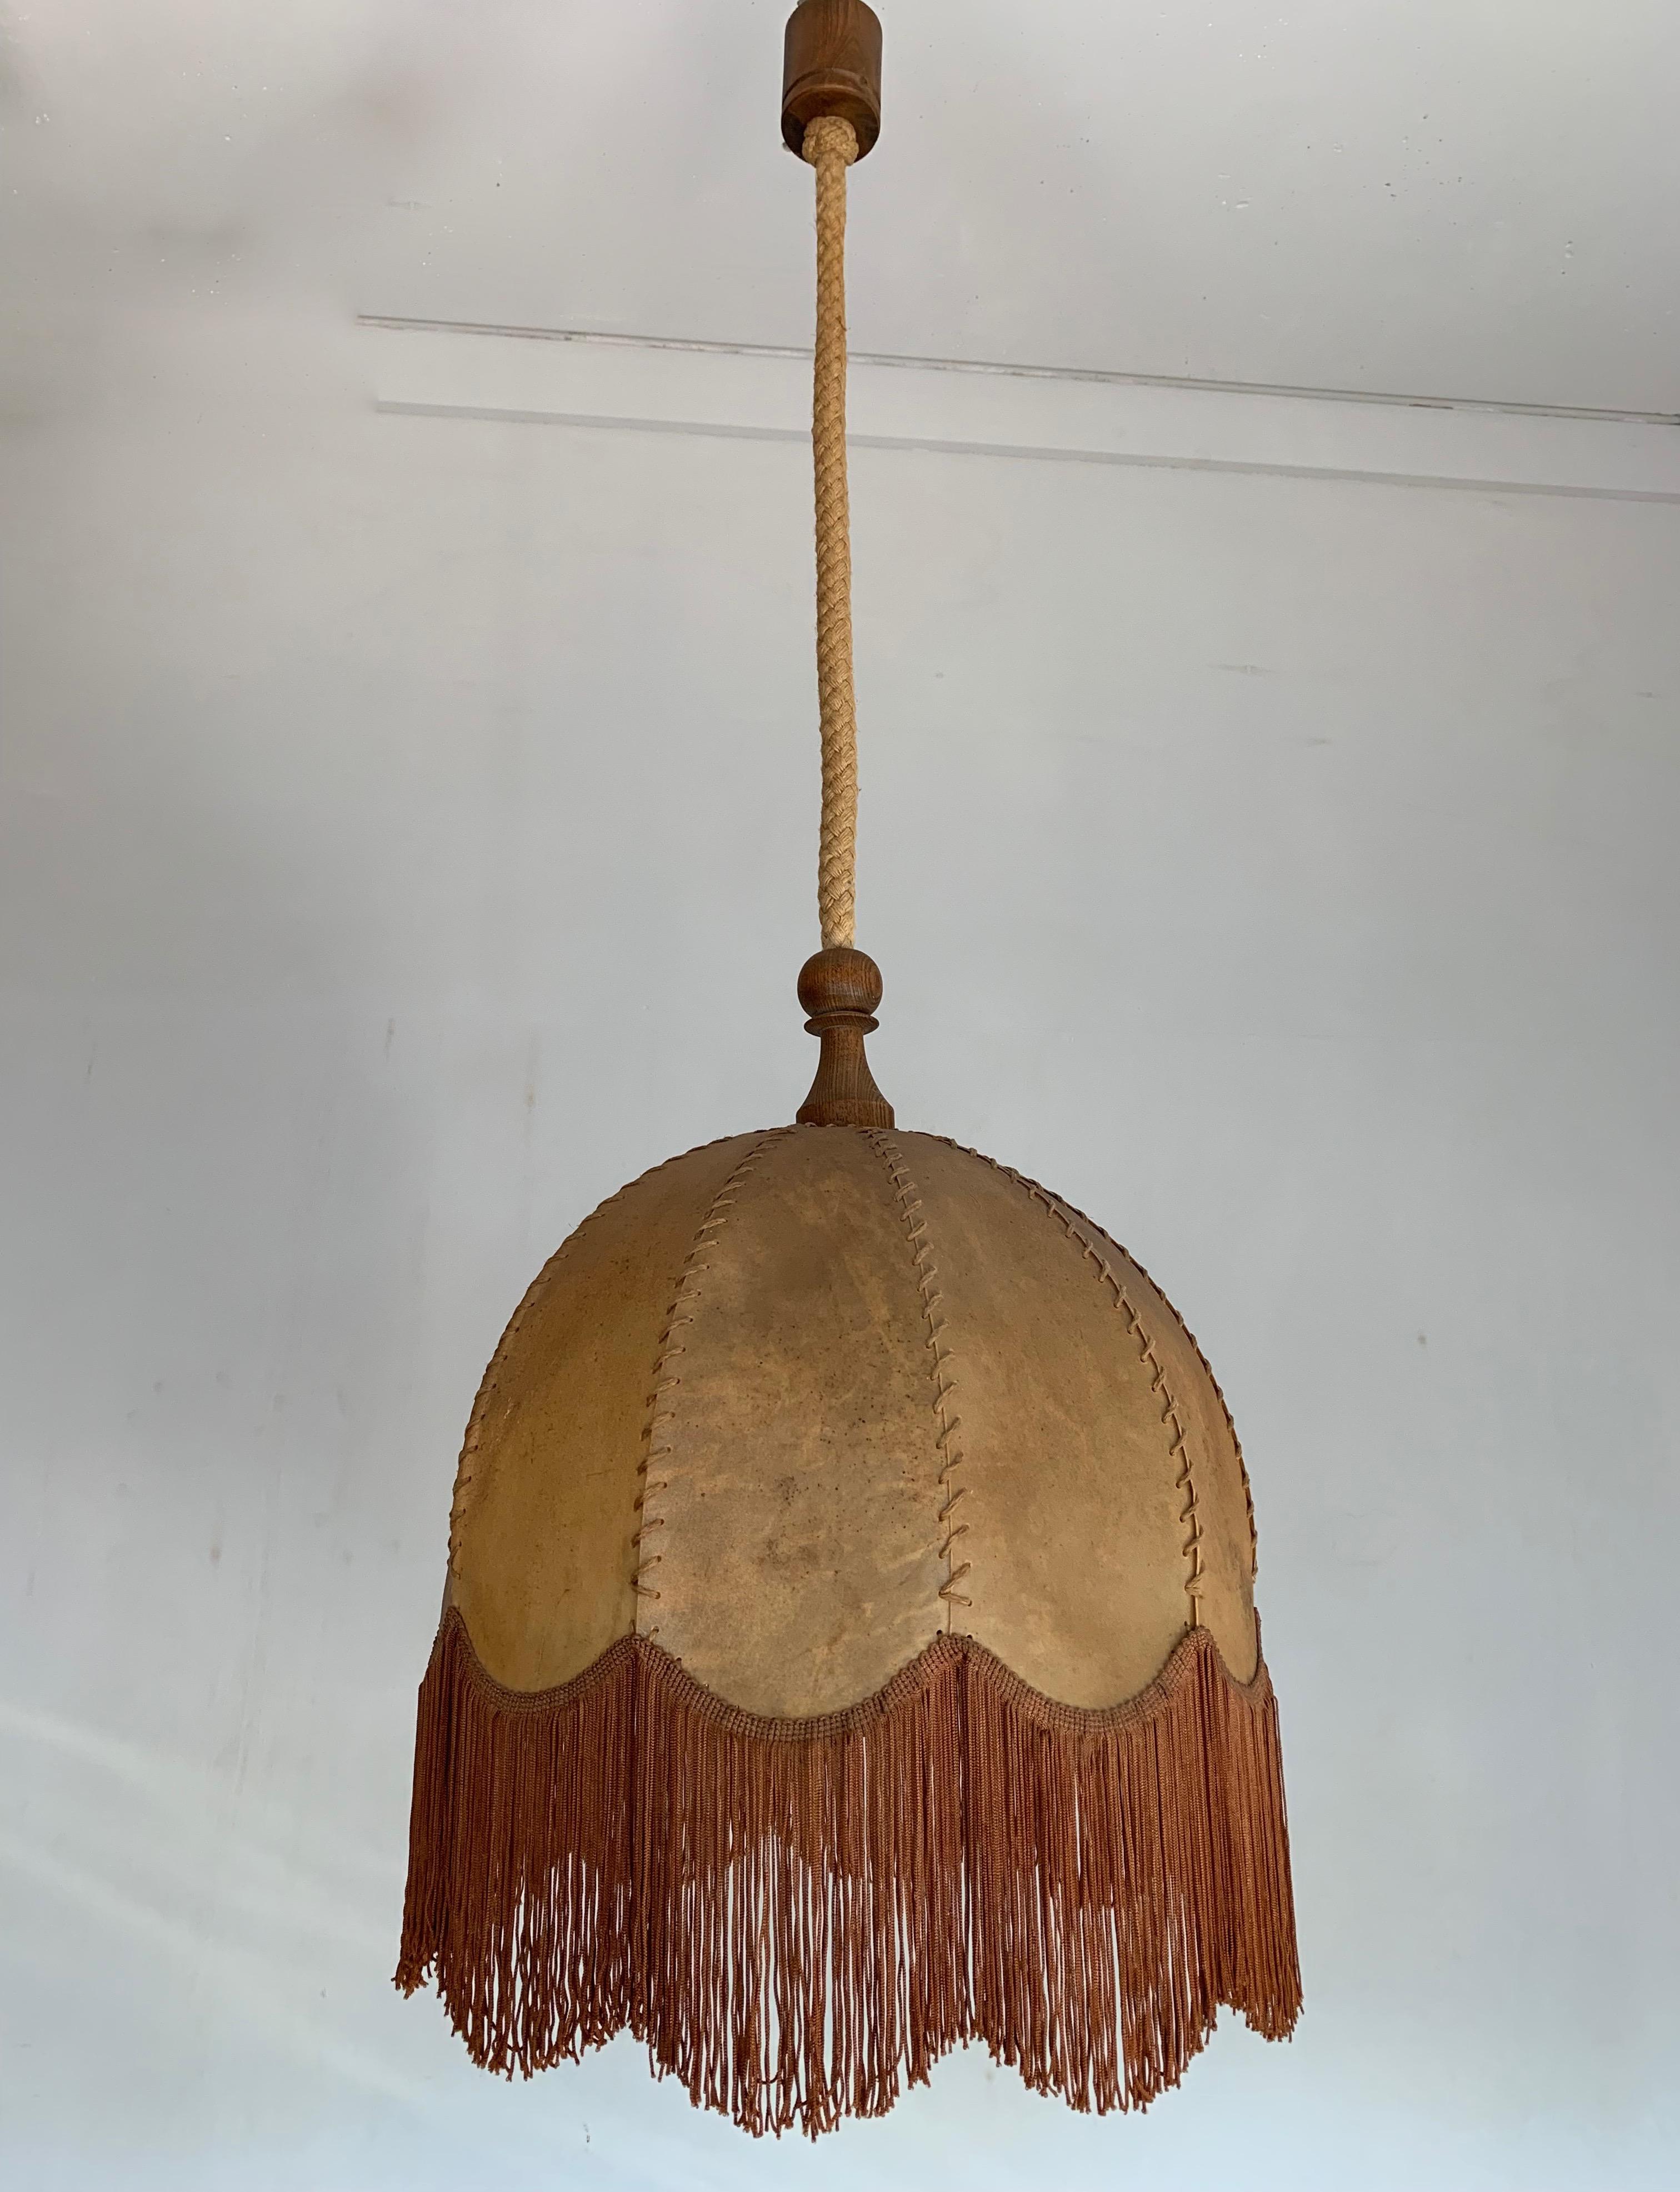 Beautiful shape and excellent condition pendant.

This early 20th century leather pendant comes with the original rope and ceiling cap. The shape, the color and the effect of the light shining through the natural hide make this pendant a real joy to